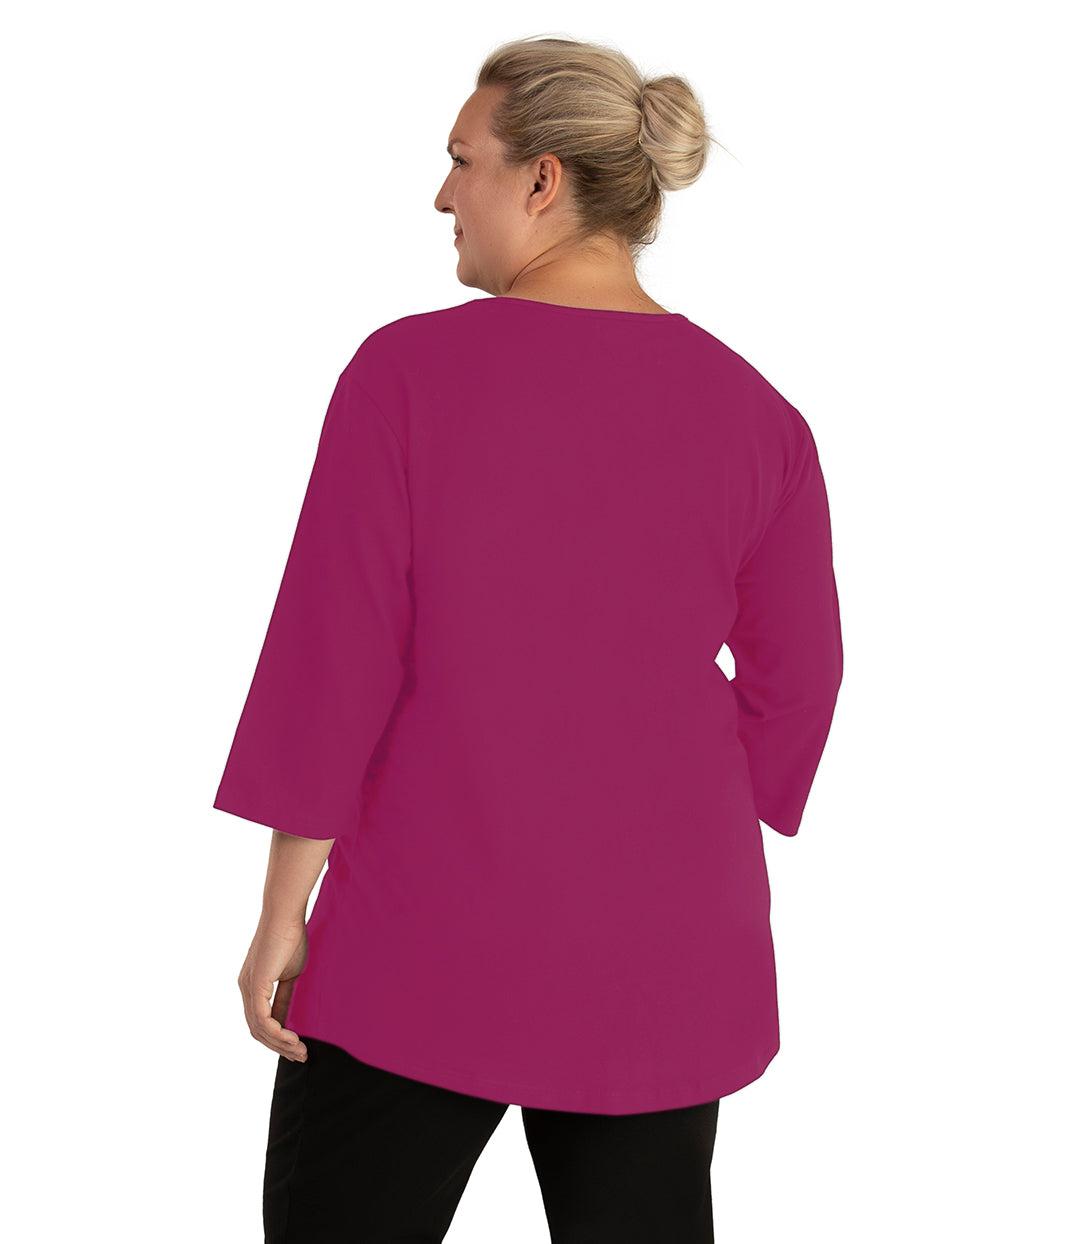 Plus size woman, facing back looking left, wearing JunoActive plus size Stretch Naturals Scoop Neck ¾ Sleeve Top in the color Merlot. She is wearing JunoActive Plus Size Leggings in the color Black.